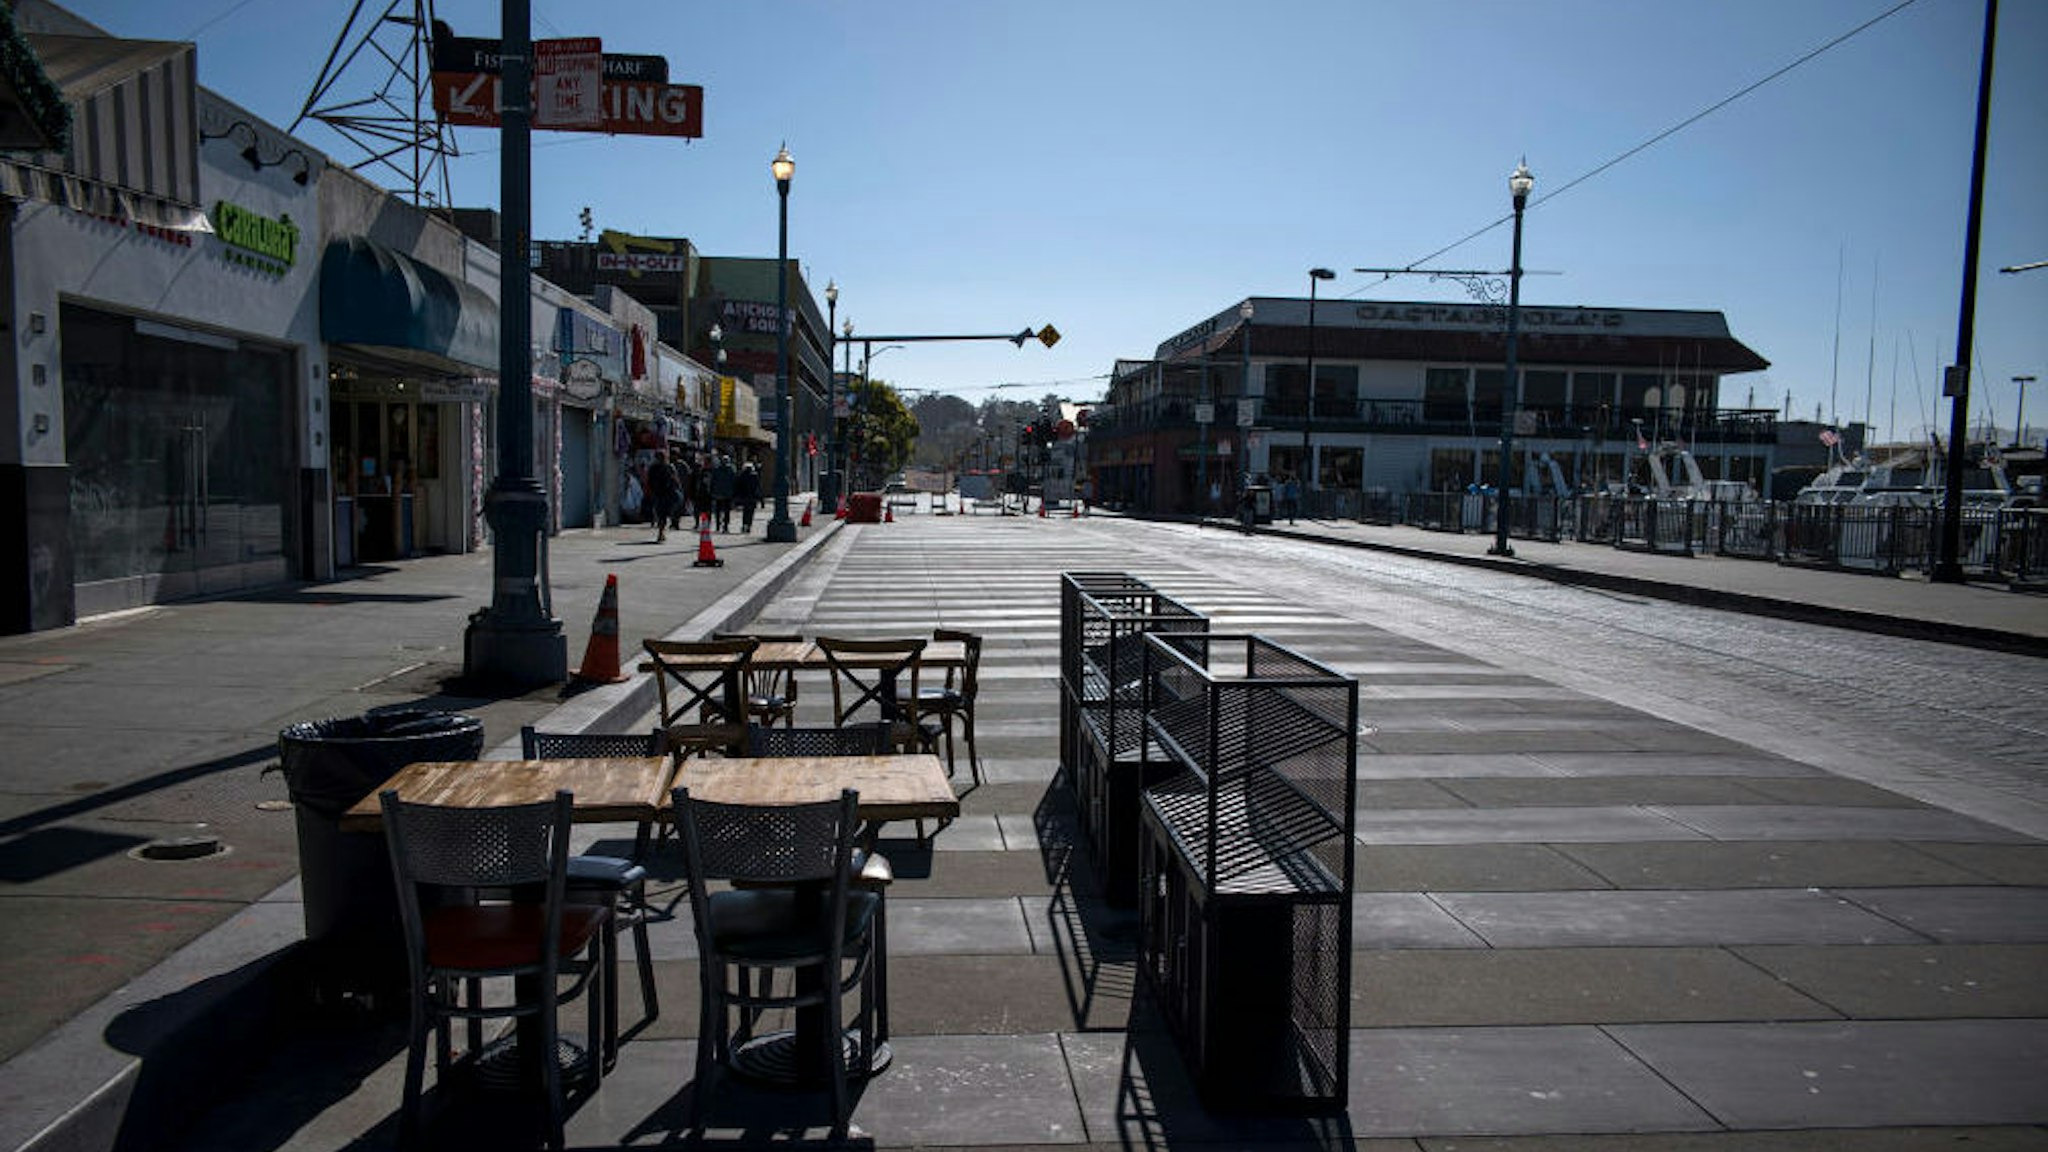 Empty tables and chairs stand outside a restaurant on Jefferson Street at Fisherman's Wharf in San Francisco, California, U.S., on Wednesday, July 8, 2020. Built from the rubble of the 1906 earthquake and fire, the Wharf is now facing a different sort of rebuild after Covid-19 economically flattened it.